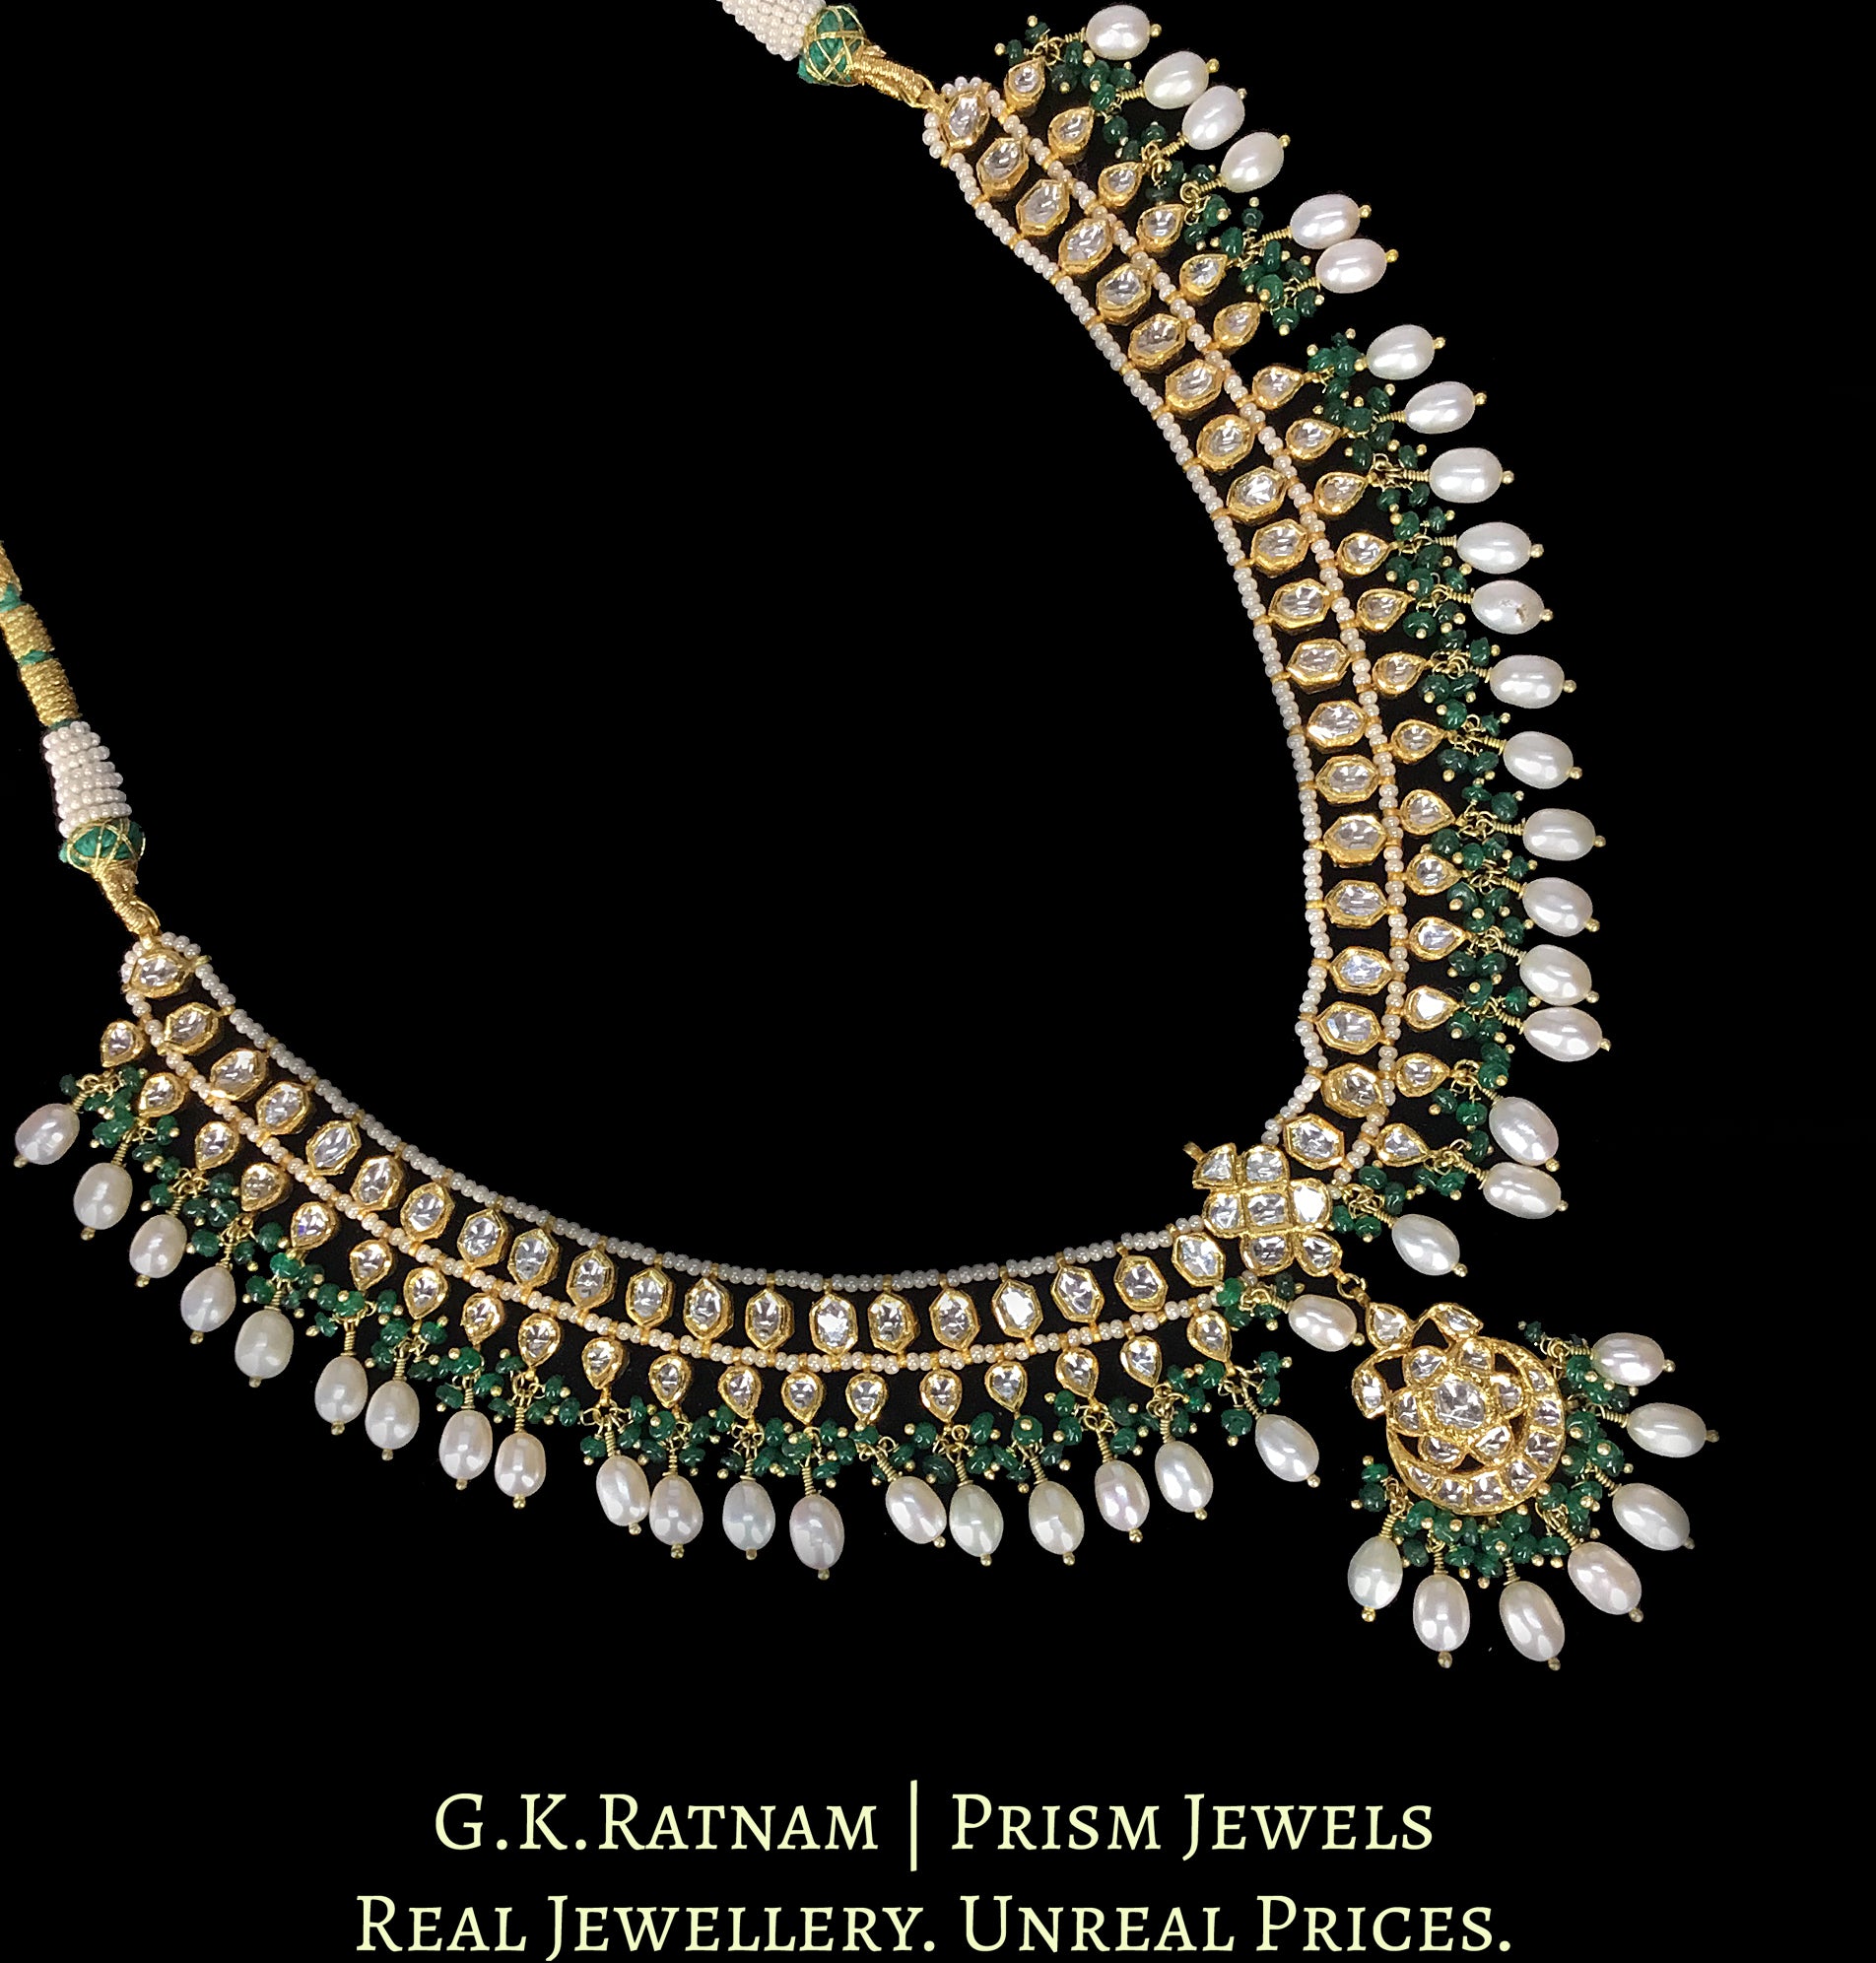 22k Gold and Diamond Polki Matha Patti enhanced with elongated pearls and a hint of green